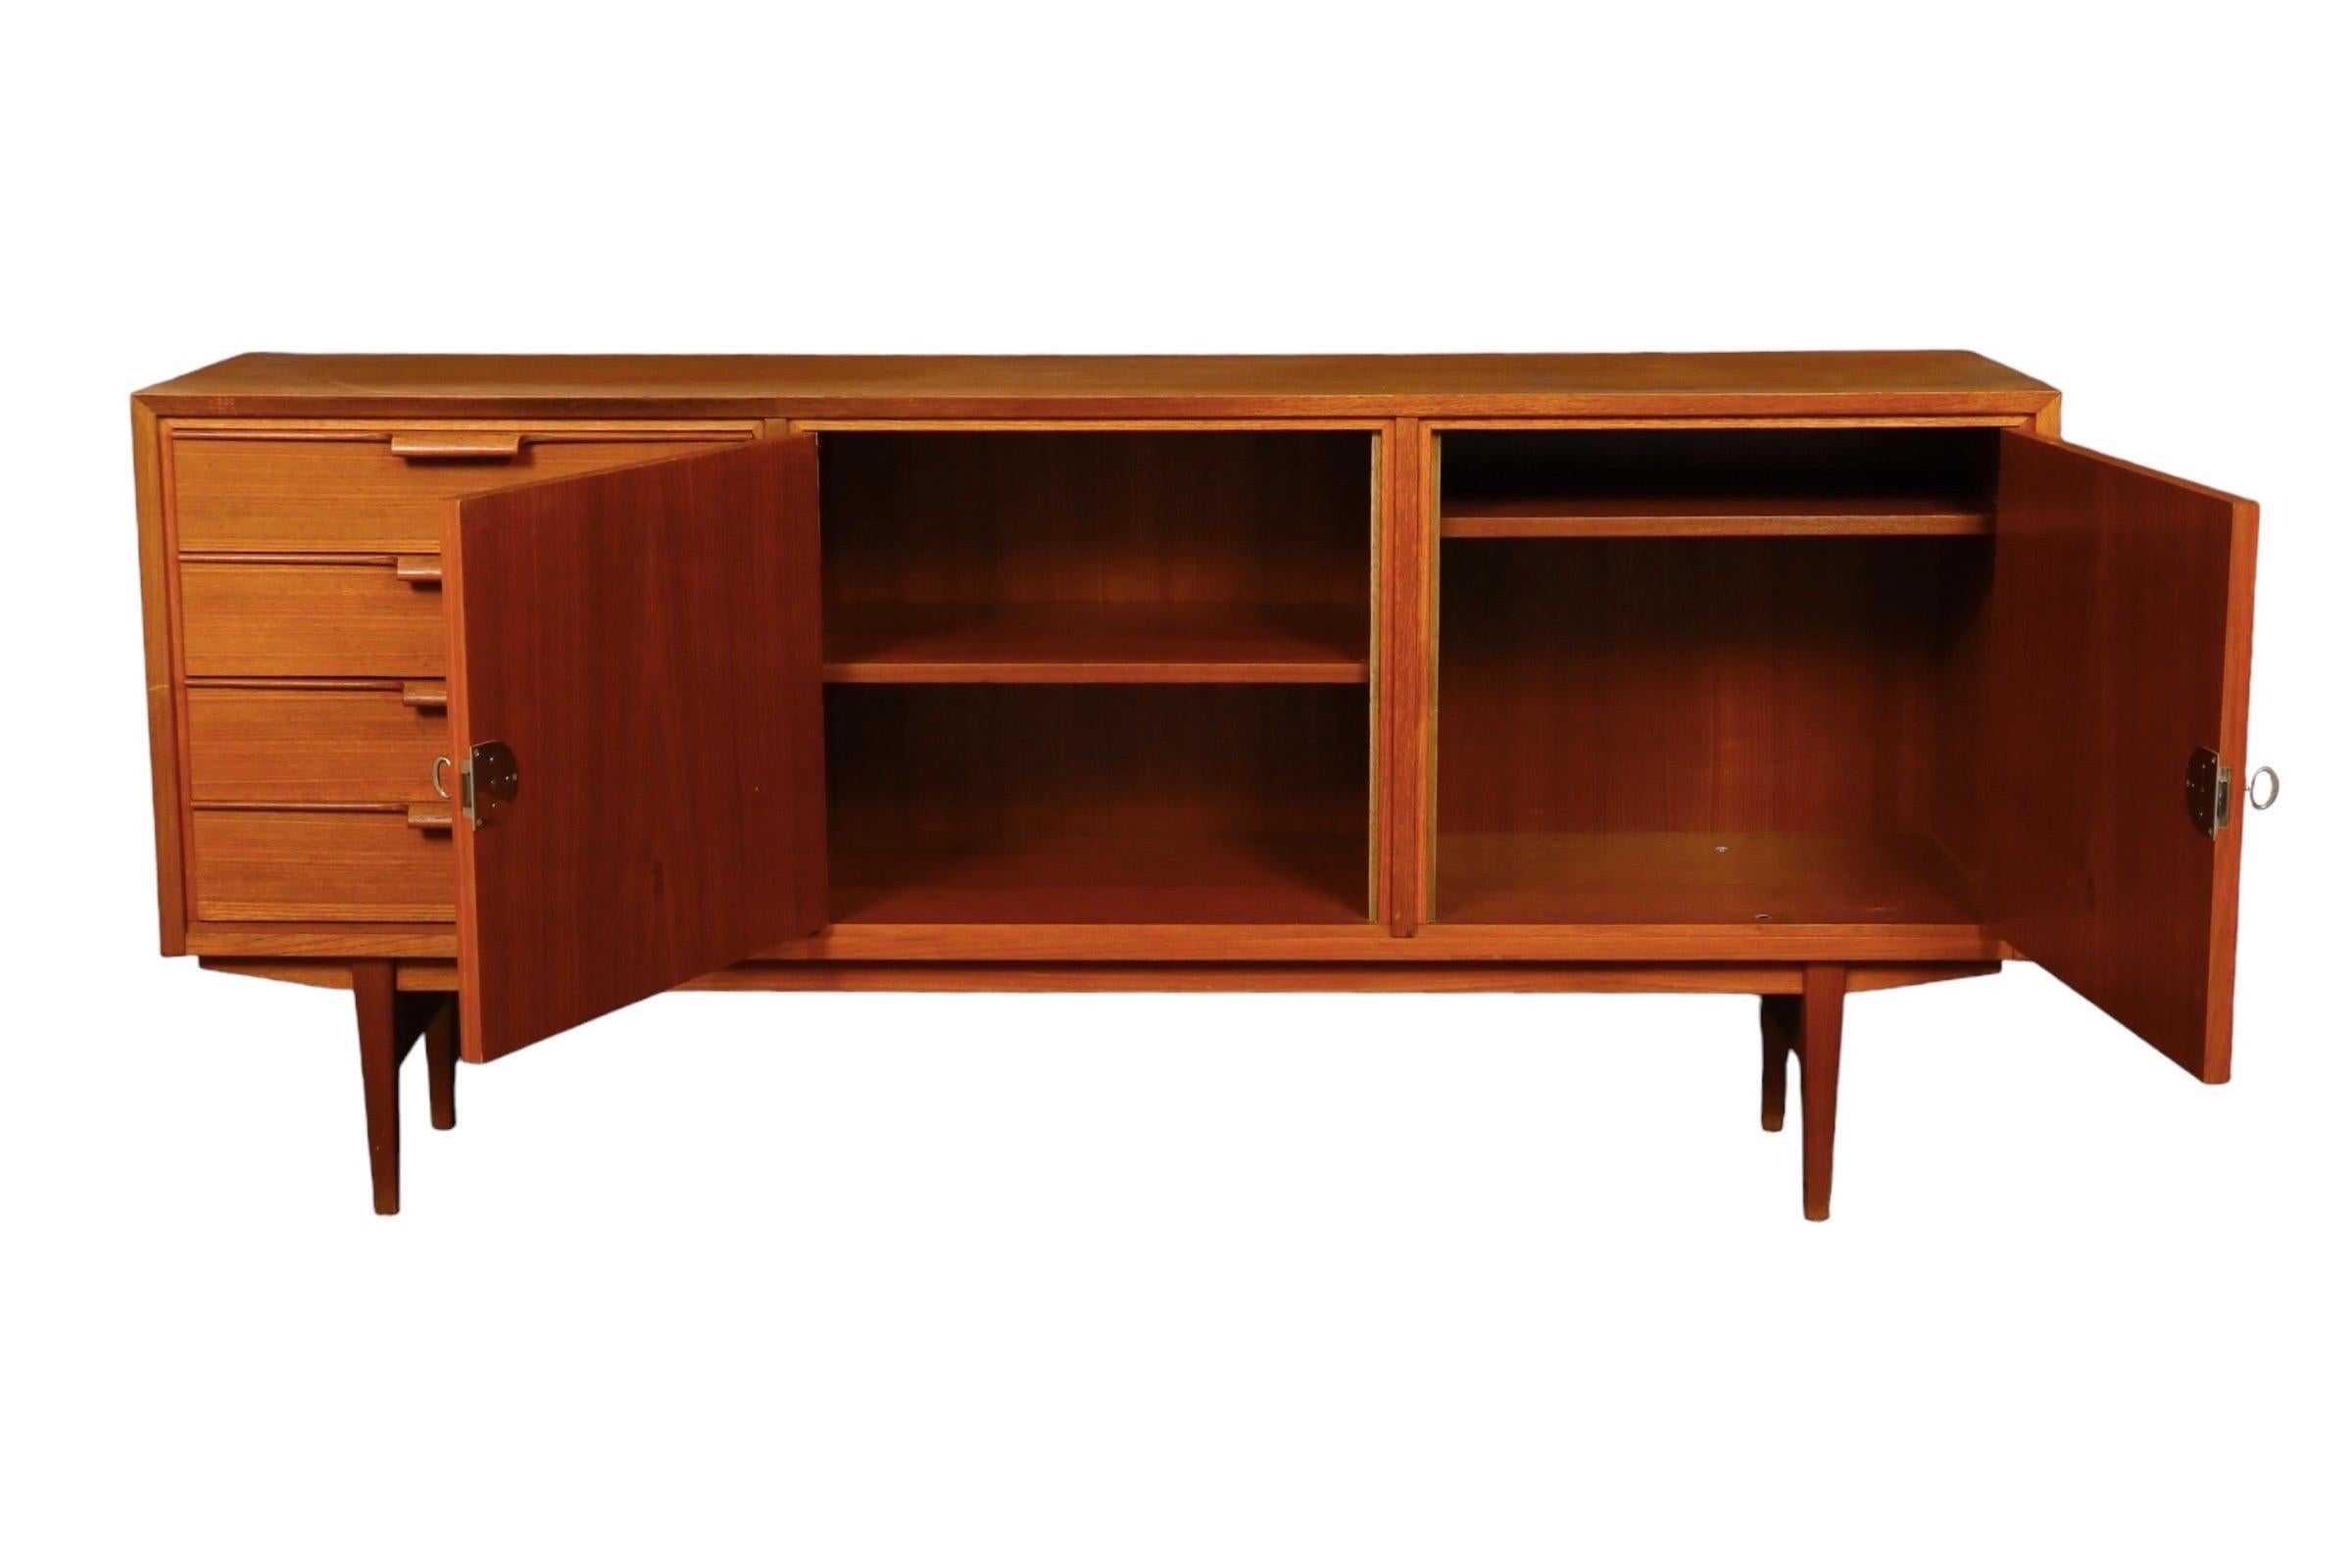 1960’s Danish Mid-Century Modern sideboard made of teak. Four drawers on the left open with curved bar handles. The locking cabinet to the center right houses a single shelf. Tapered legs are supported with a thick stretcher at each end.
 